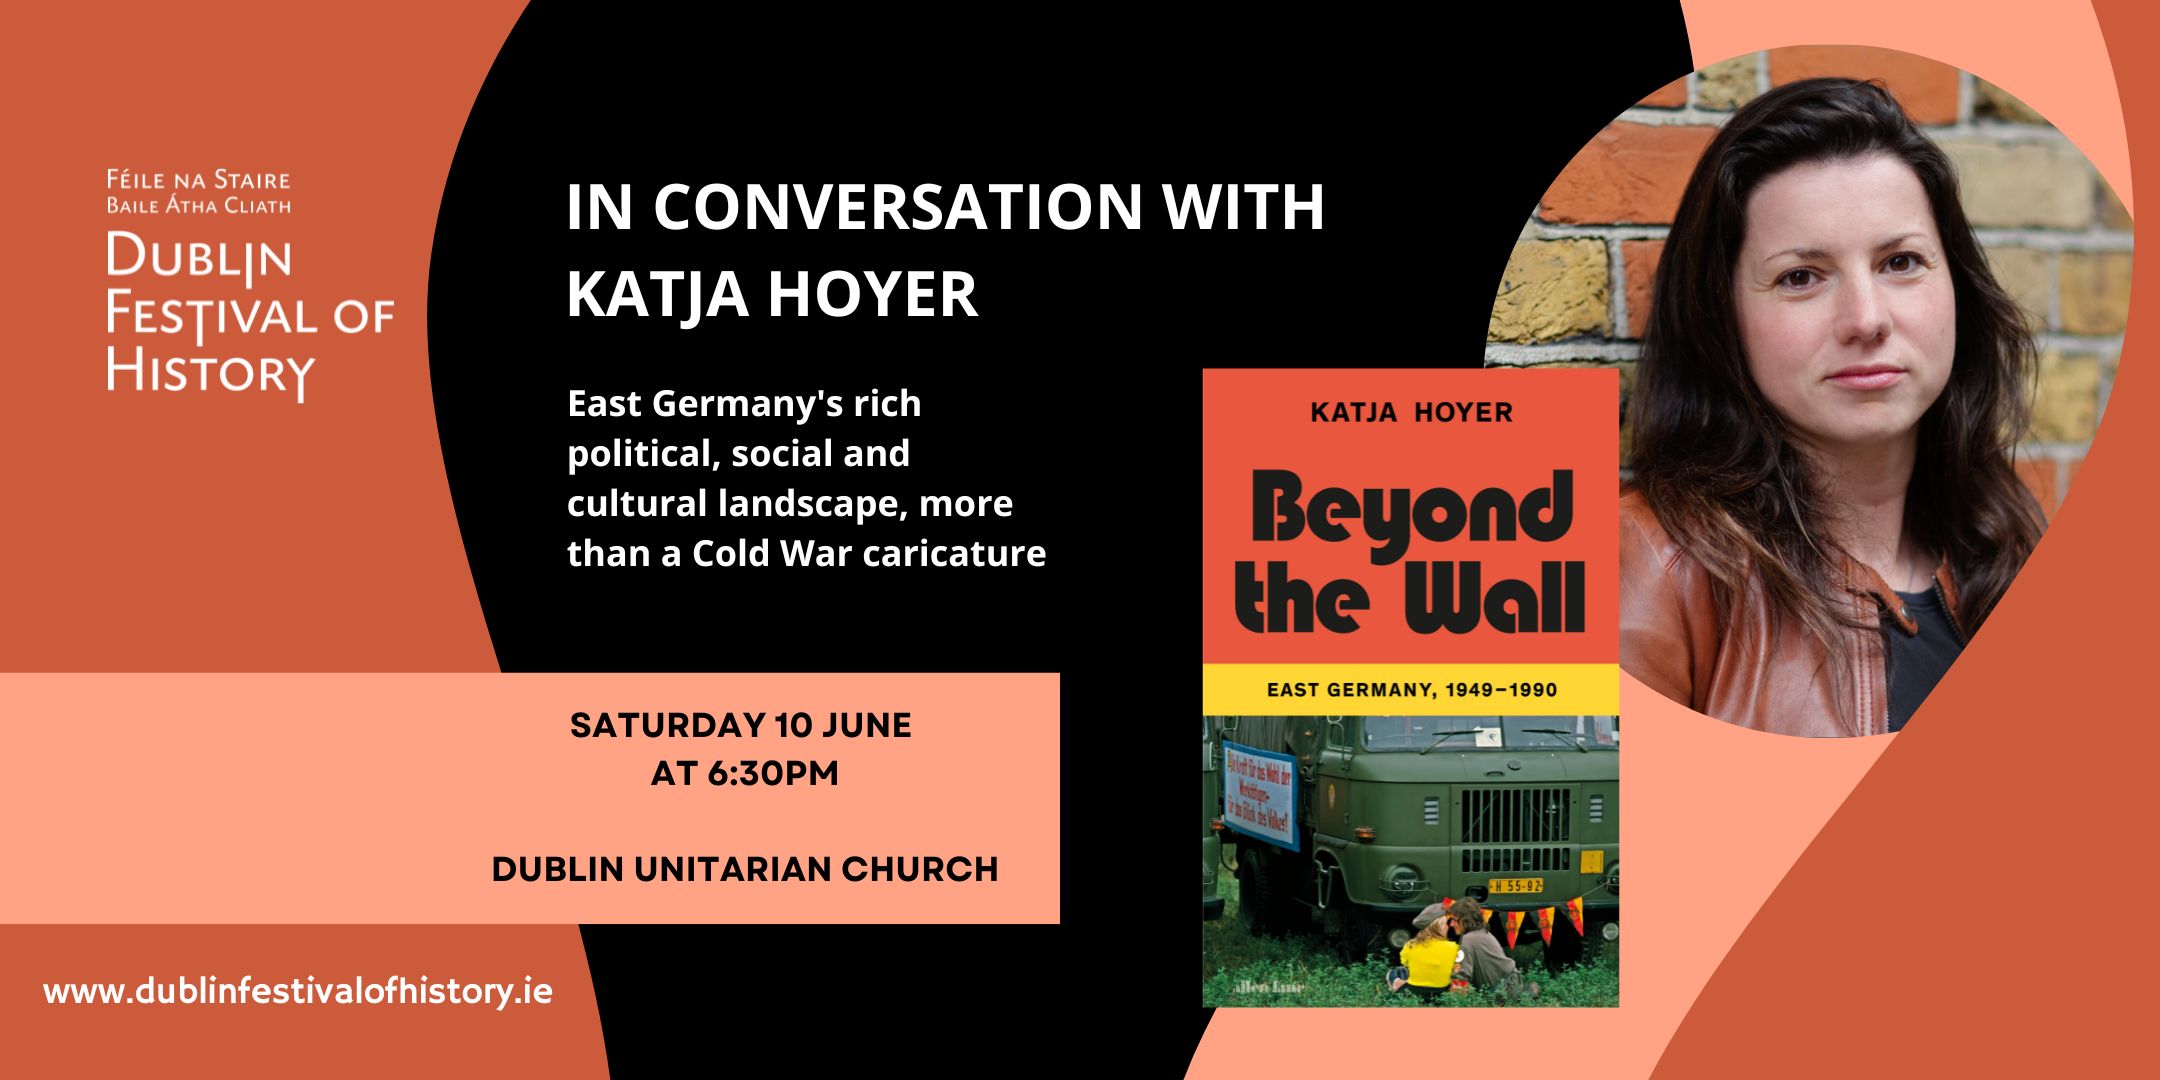 Image shows a photo of Katja Hoyer and the book cover for Beyond the Wall, and provides event information.